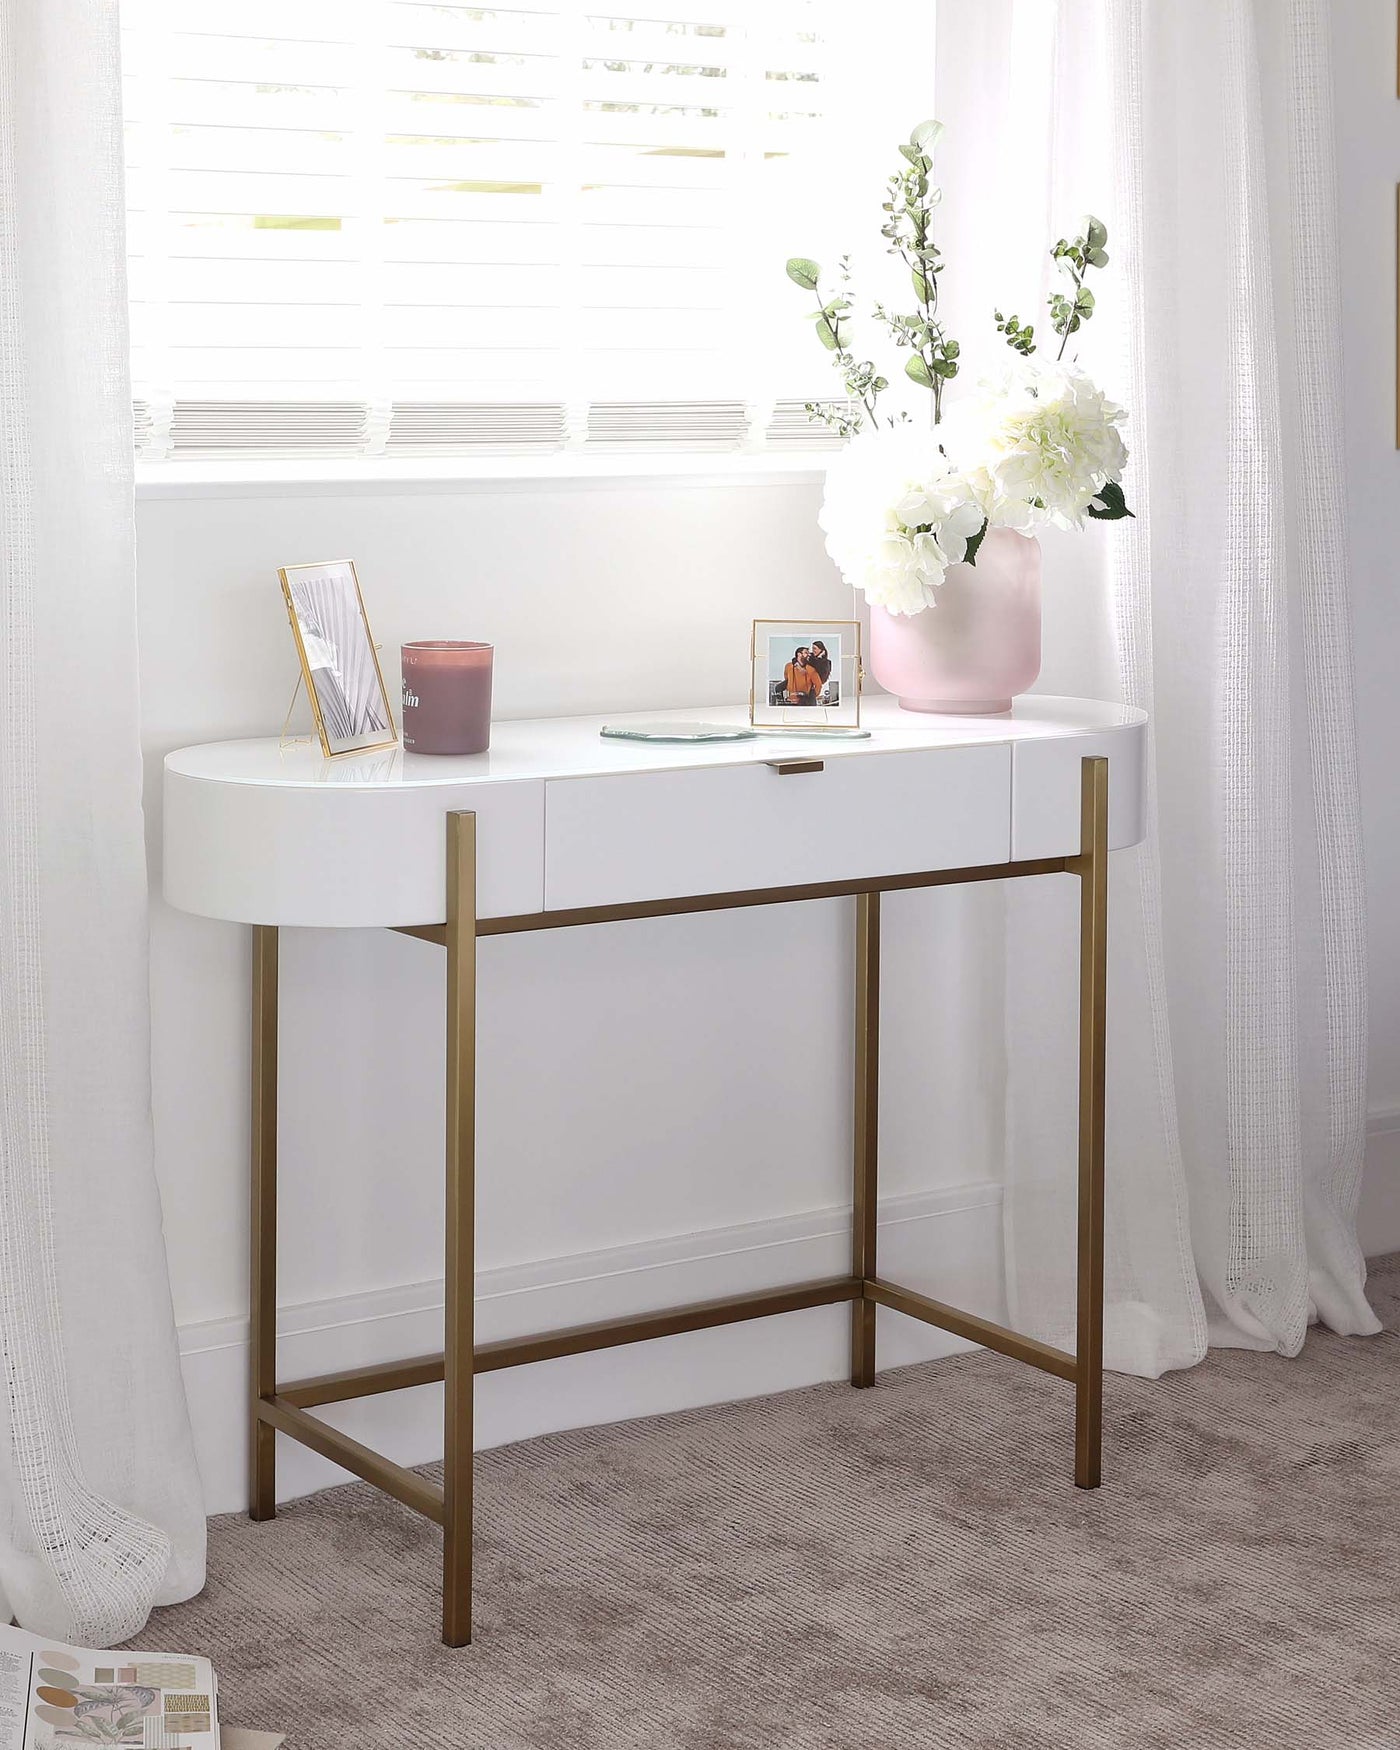 Elegant modern white console table with a curved tabletop edge and sleek golden metal legs, featuring a minimalist design ideal for contemporary interiors.